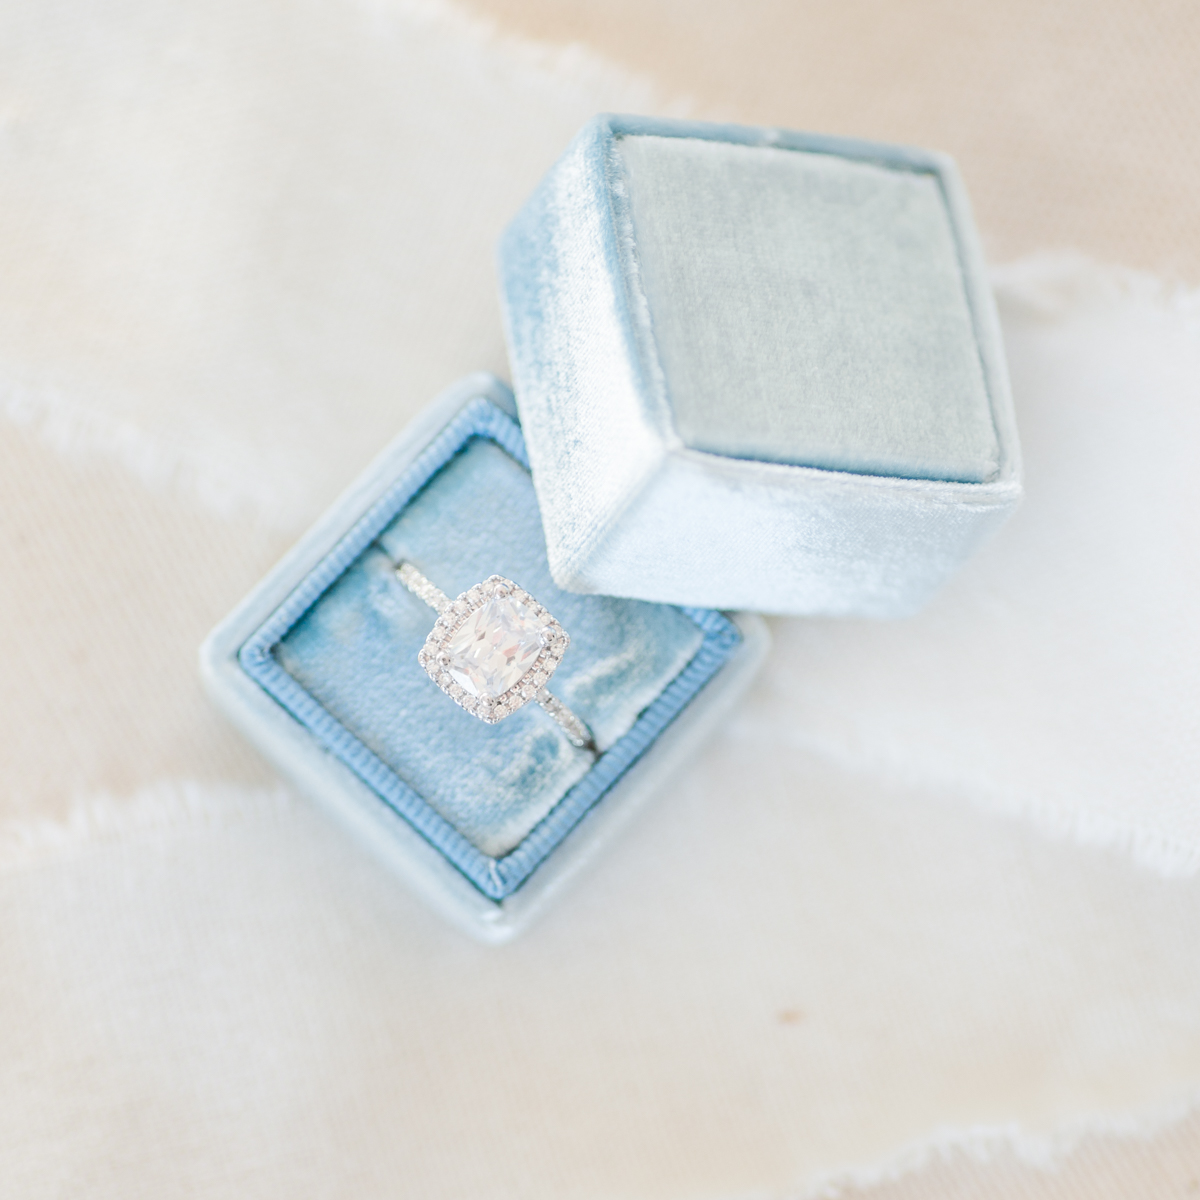 Blue Velvet ring box with gorgeous cushion cut diamond with halo